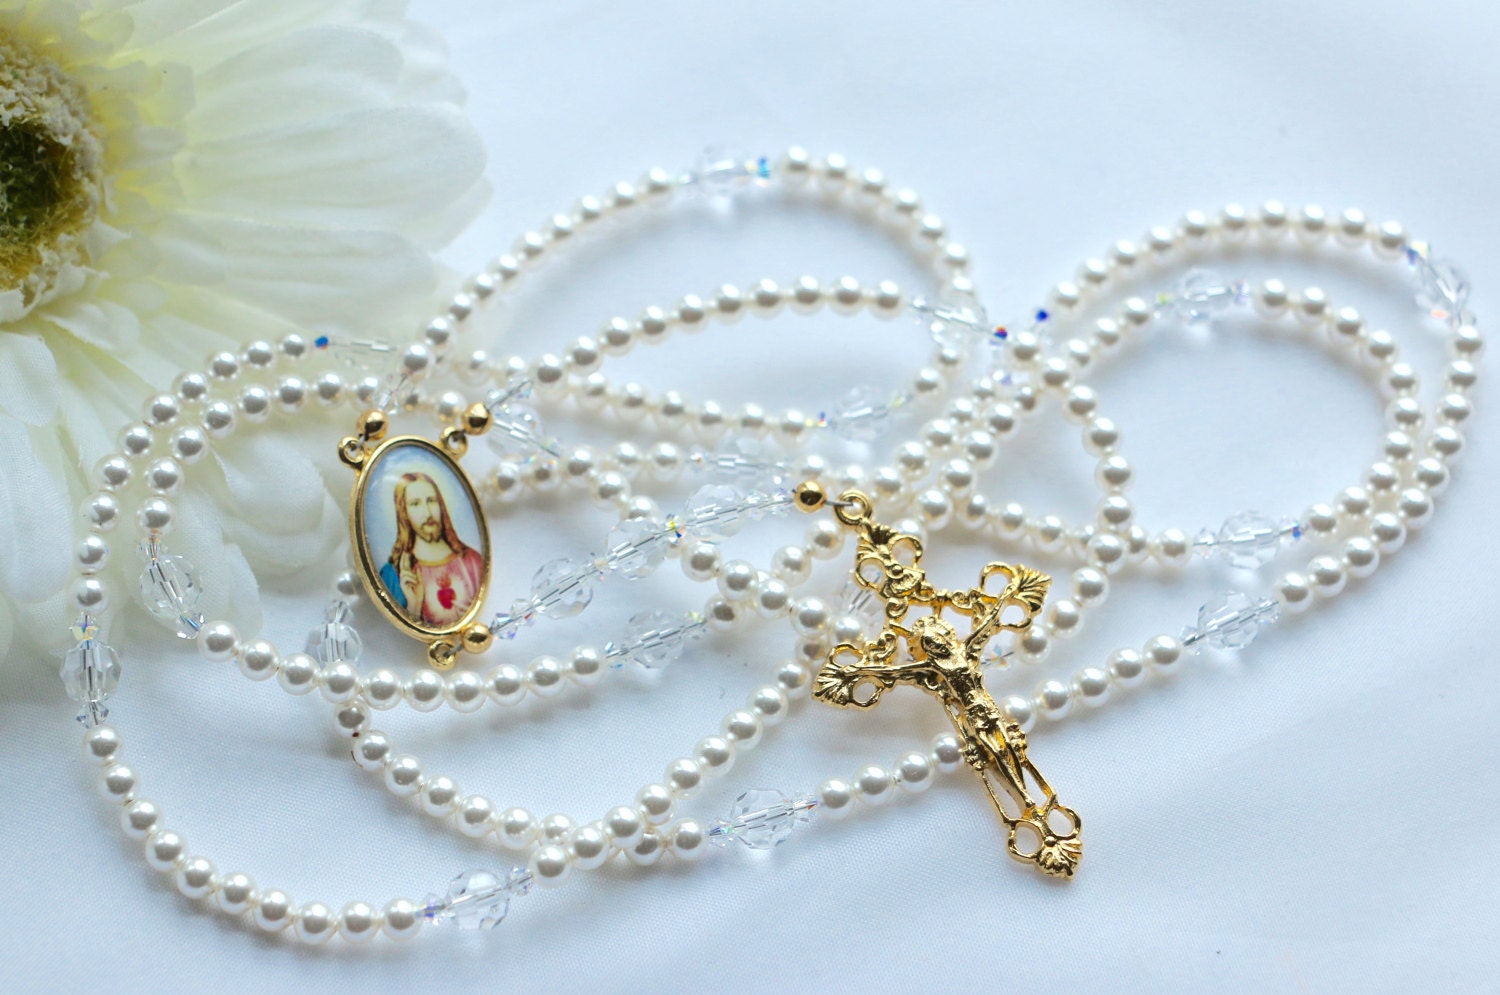 Buy One Thousand Thank You Jesus Rosary Online in India - Etsy